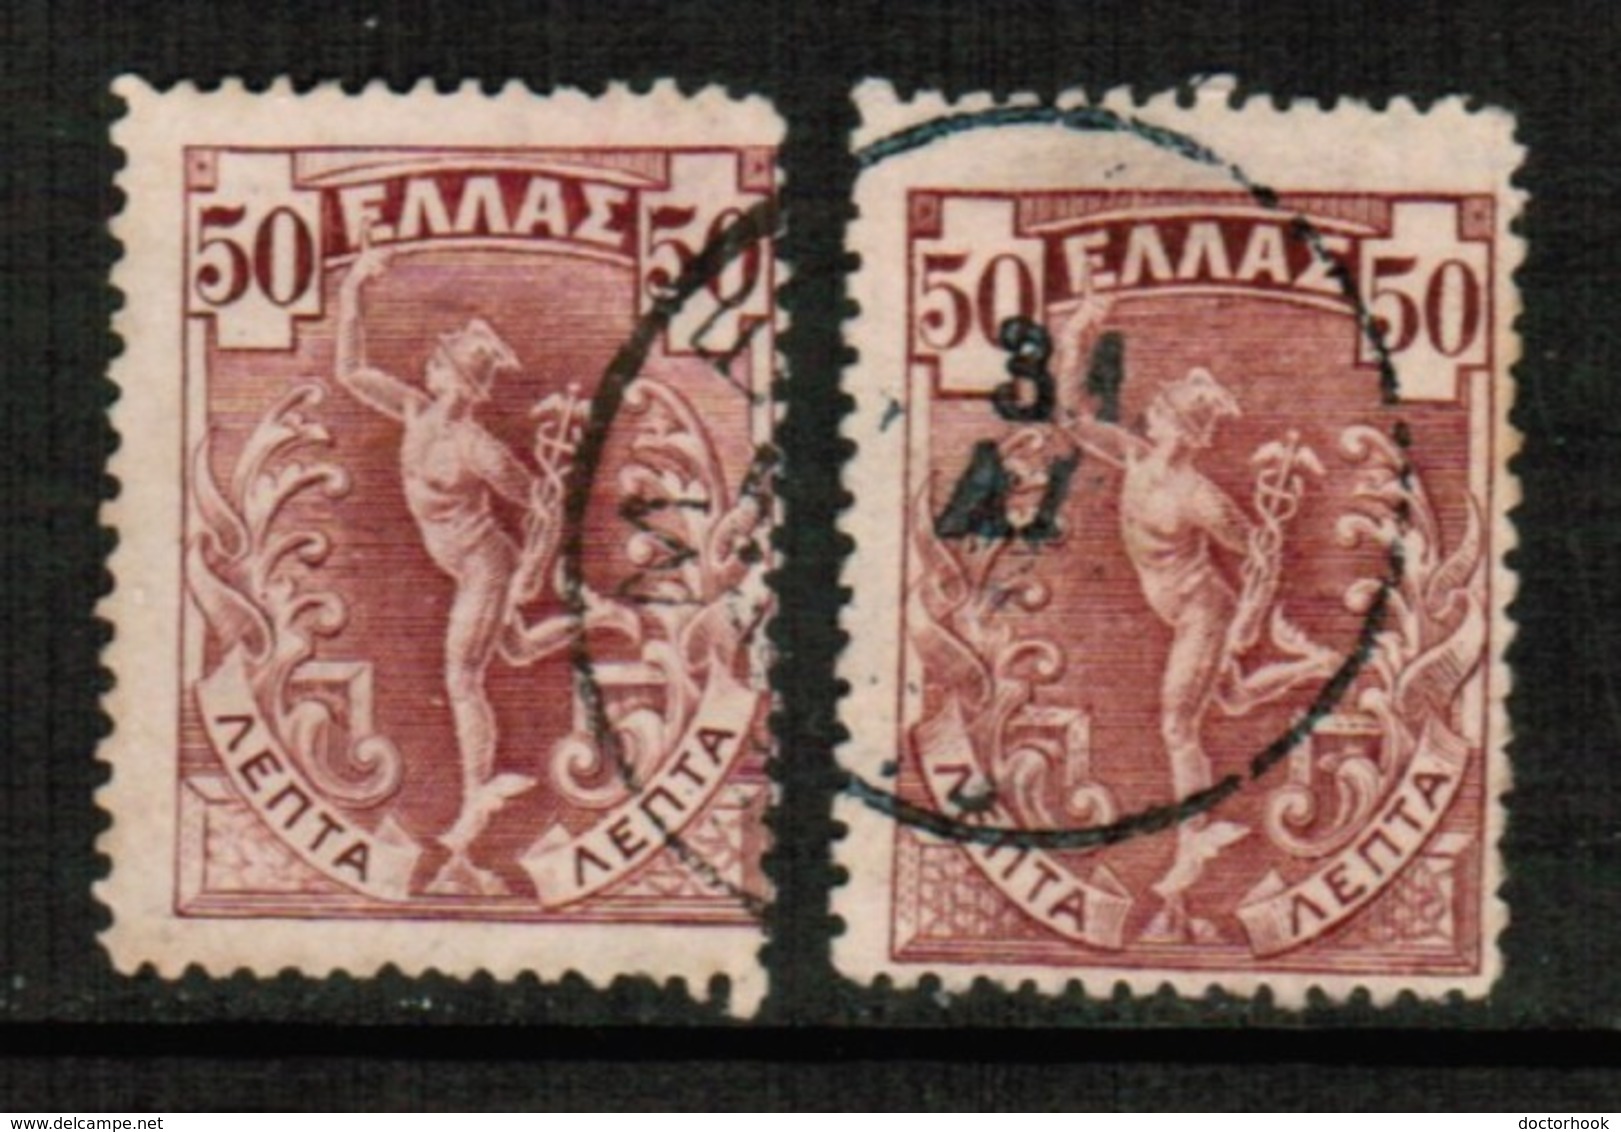 GREECE   Scott # 174 F-VF USED BOTH THICK & THIN PAPER VARIETIES (Stamp Scan # 563) - Gebraucht